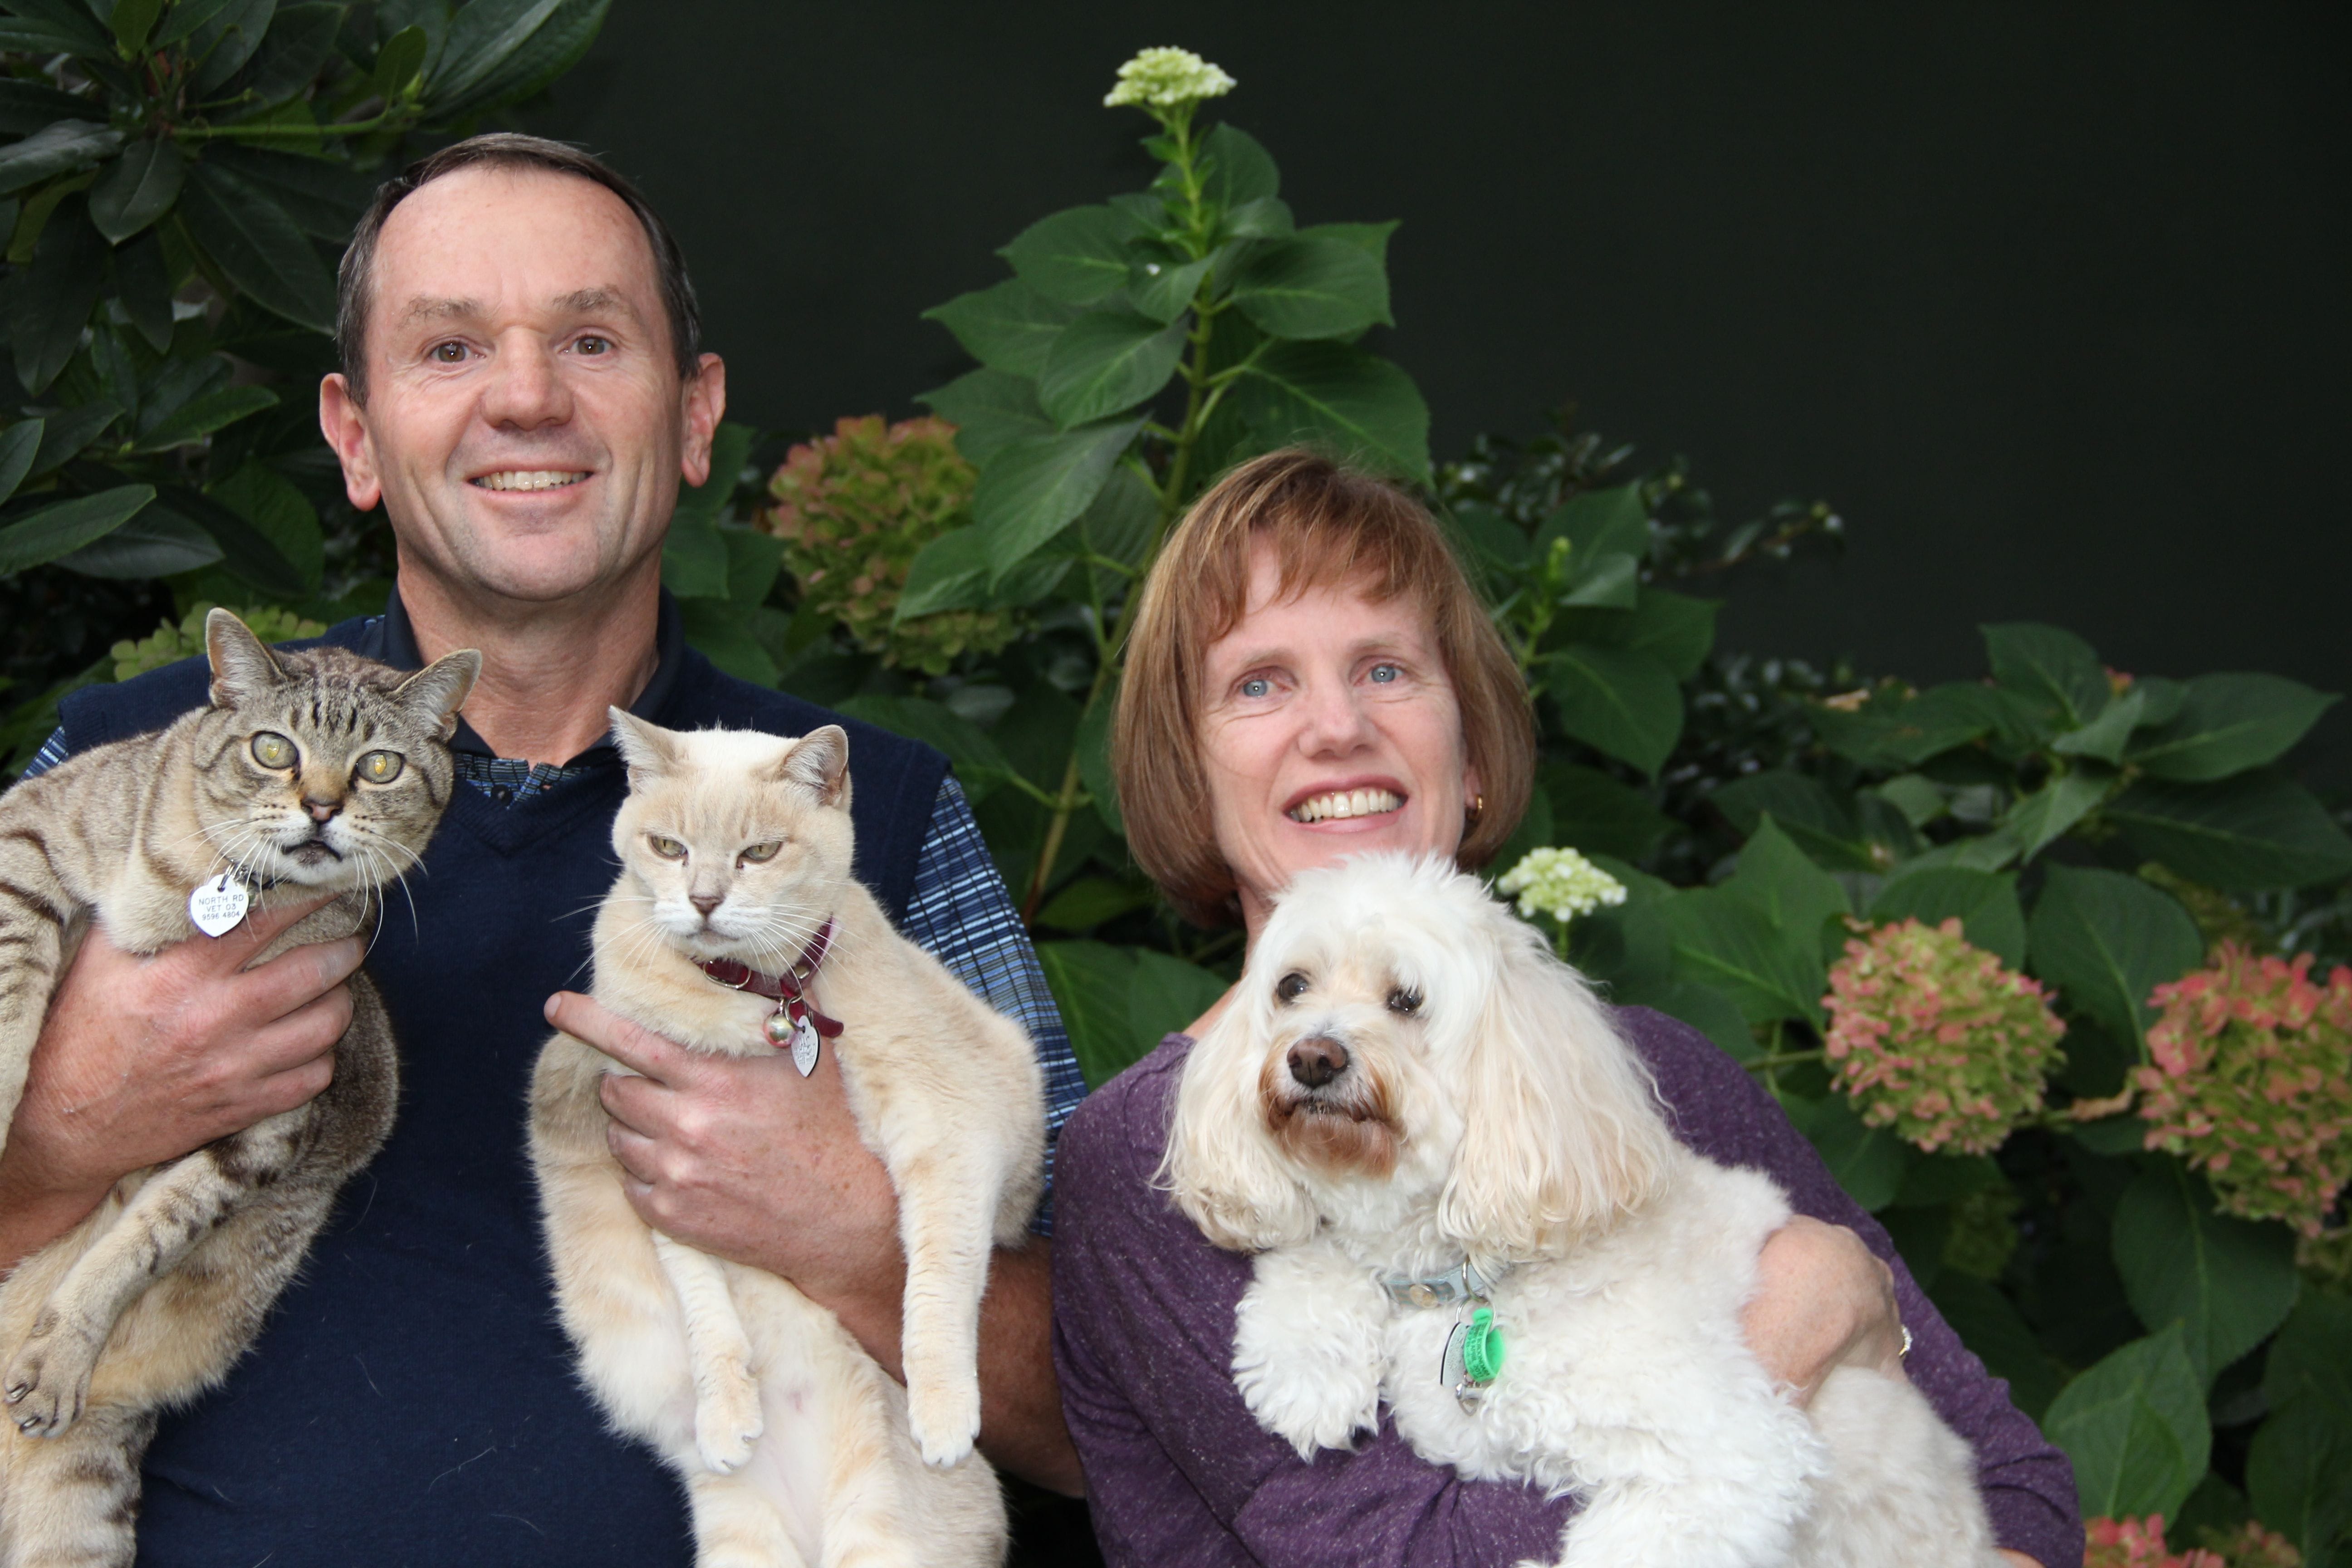 Dr Andrew Milledge and Dr Wendy Milledge, practice managers and owners of North Road Veterinary Centre